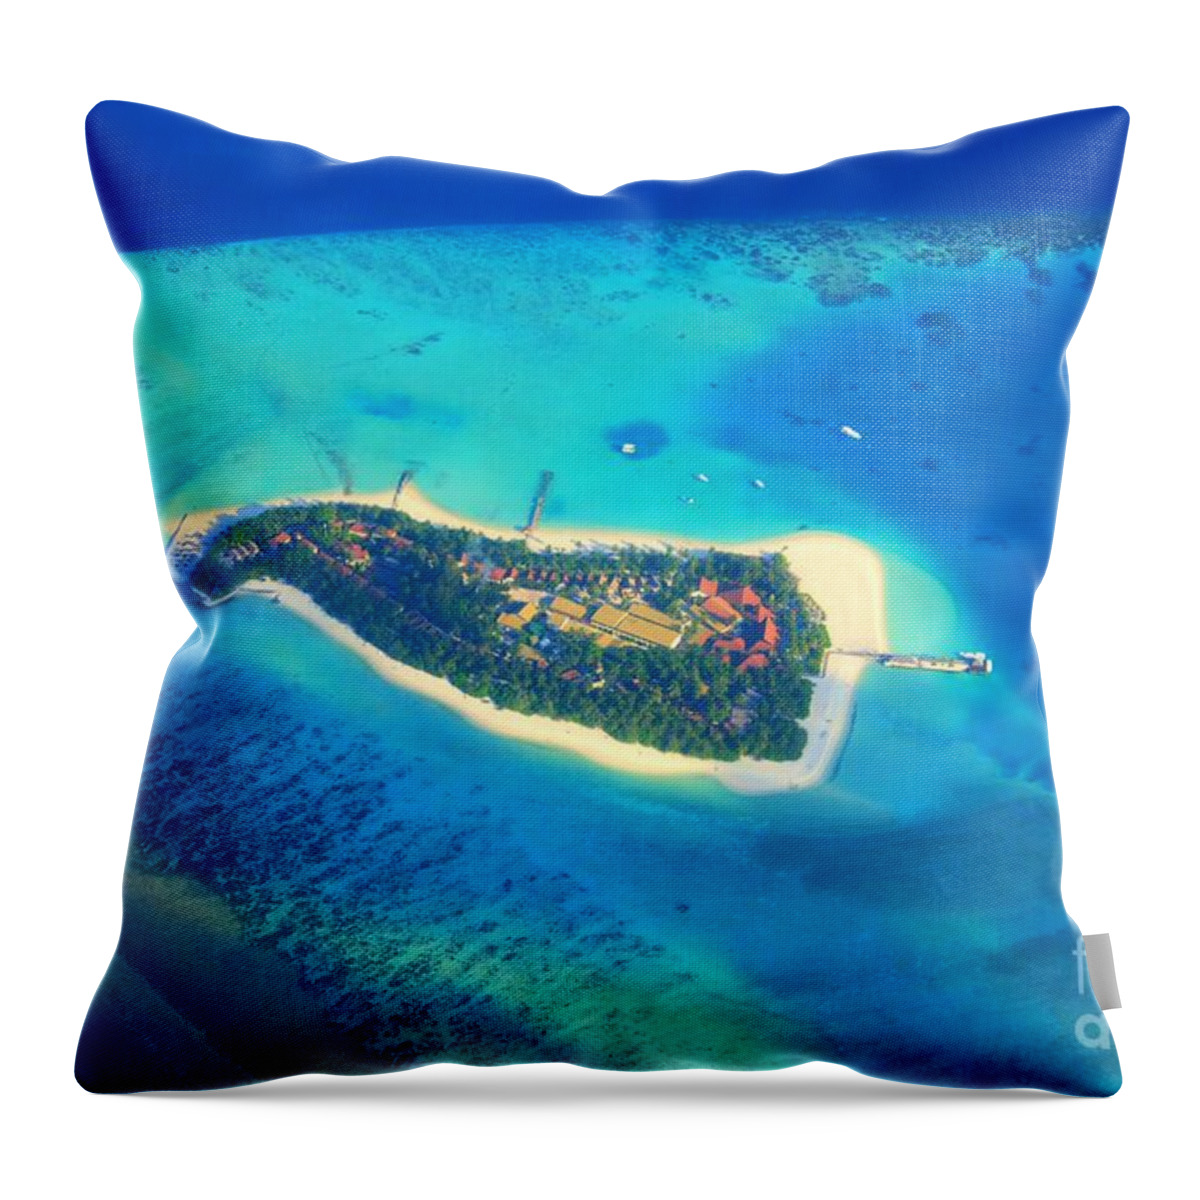 Aerial Throw Pillow featuring the photograph Island Of Dreams by David Birchall